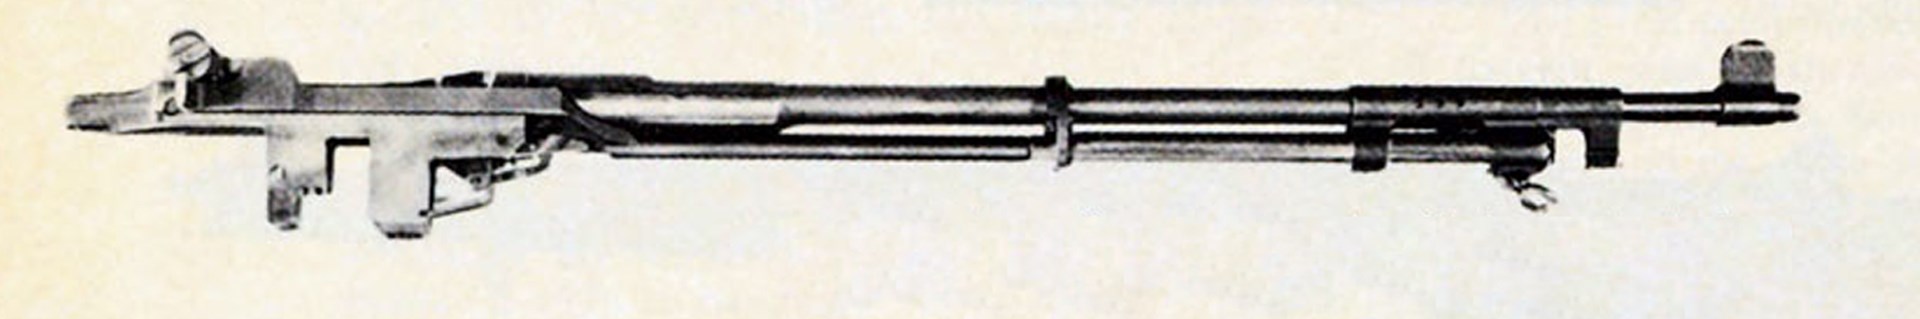 M1E4 Rifle working parts with bolt retracted.